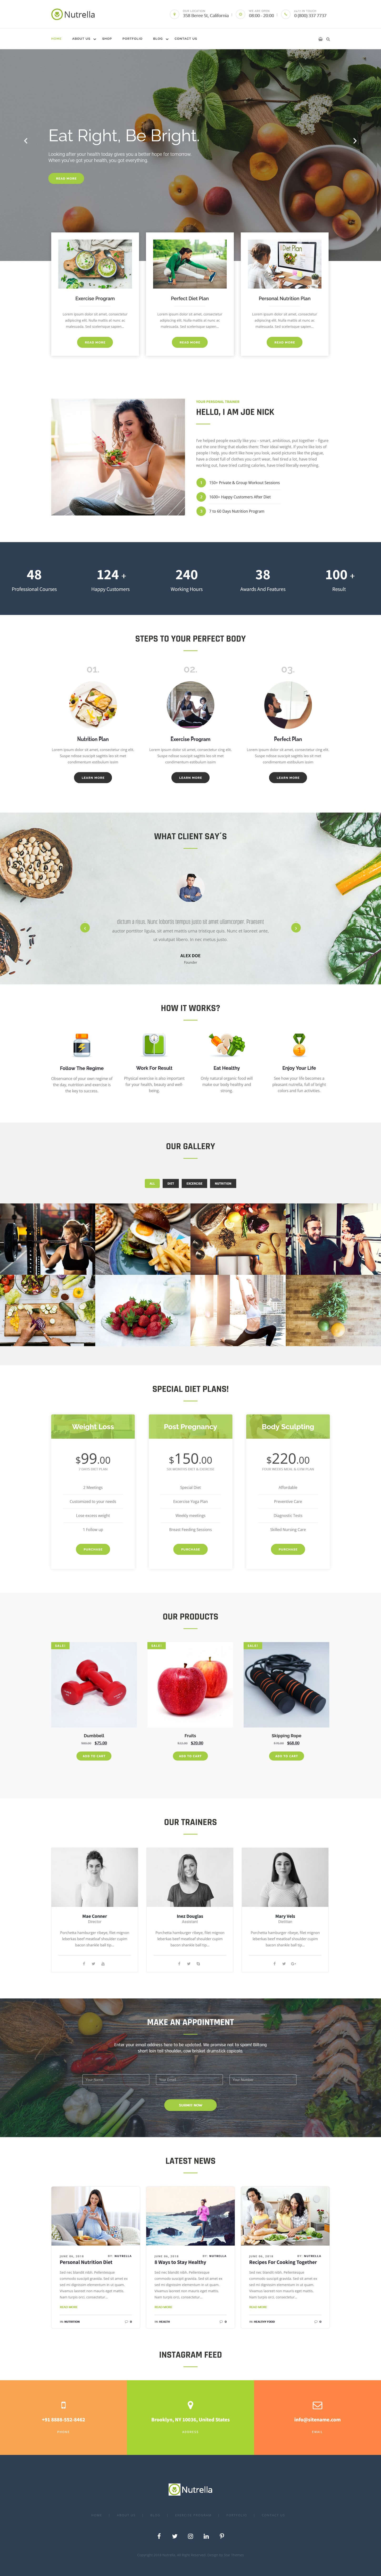 Diet and Nutrition WordPress Theme